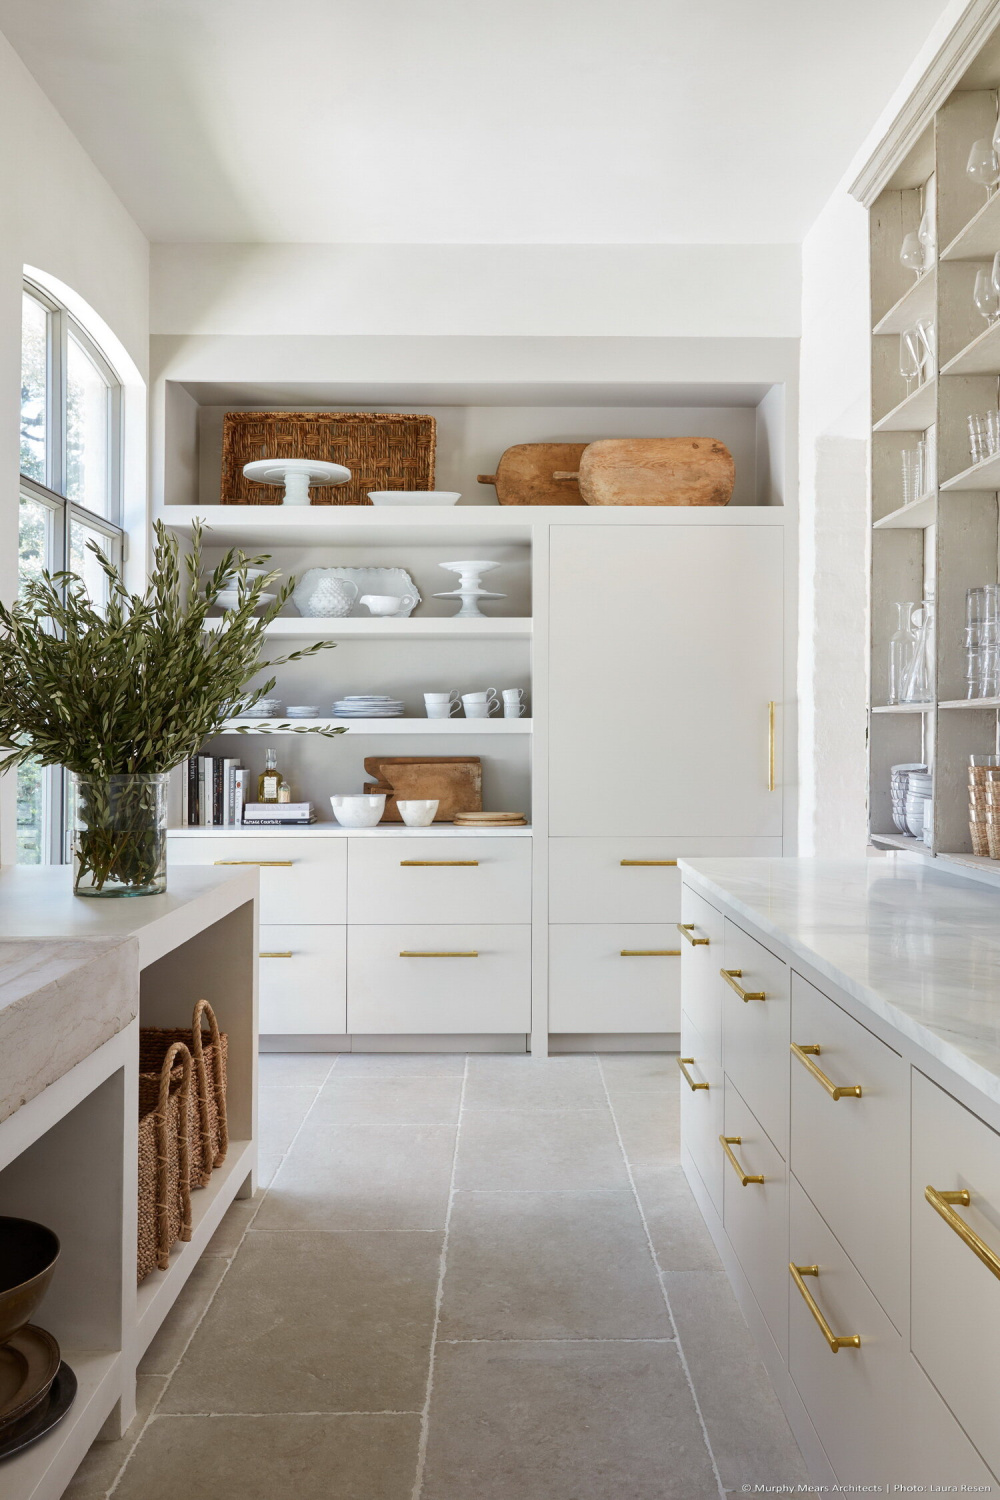 Modern French kitchen with rustic elegant design by Jill Egan and architecture by Kirby Mears. #modernfrench #kitchendesign